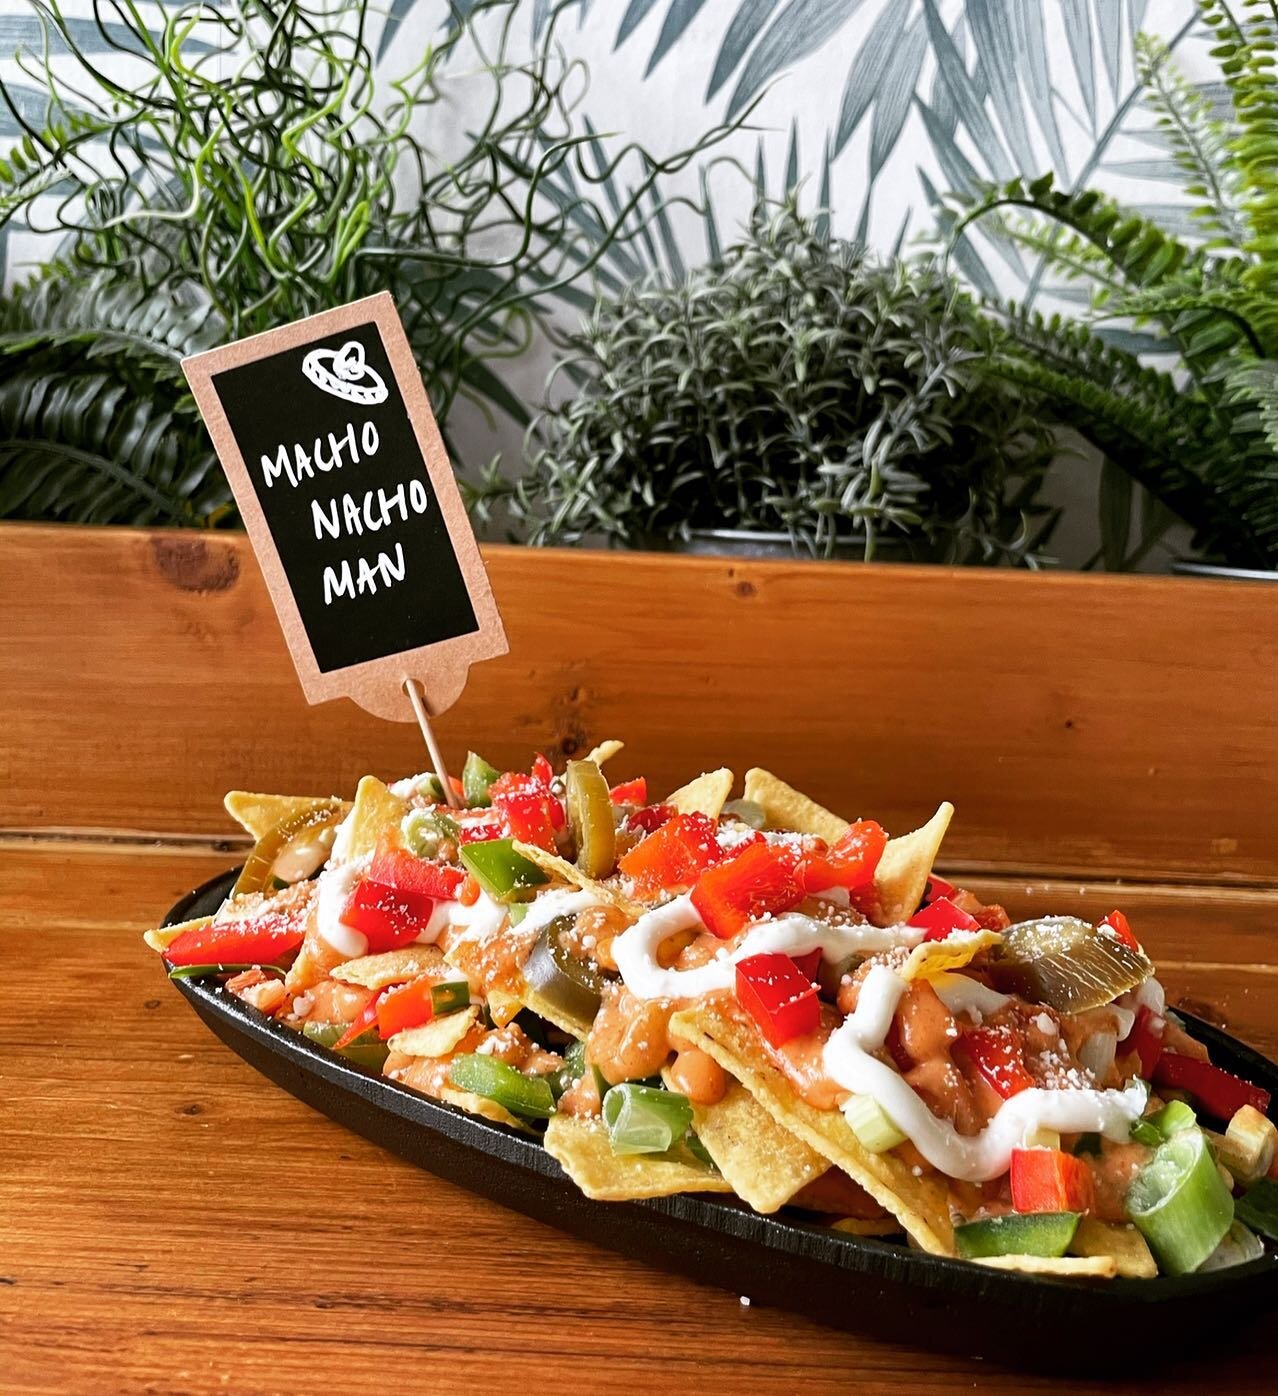 If you enjoy our nachos with the infamous homemade nachos cheese sauce, then definitely try our dirty fries. If you like the dirty fries, checkout the DIRTIER fries creeping onto the menus this week. Diana would be proud.